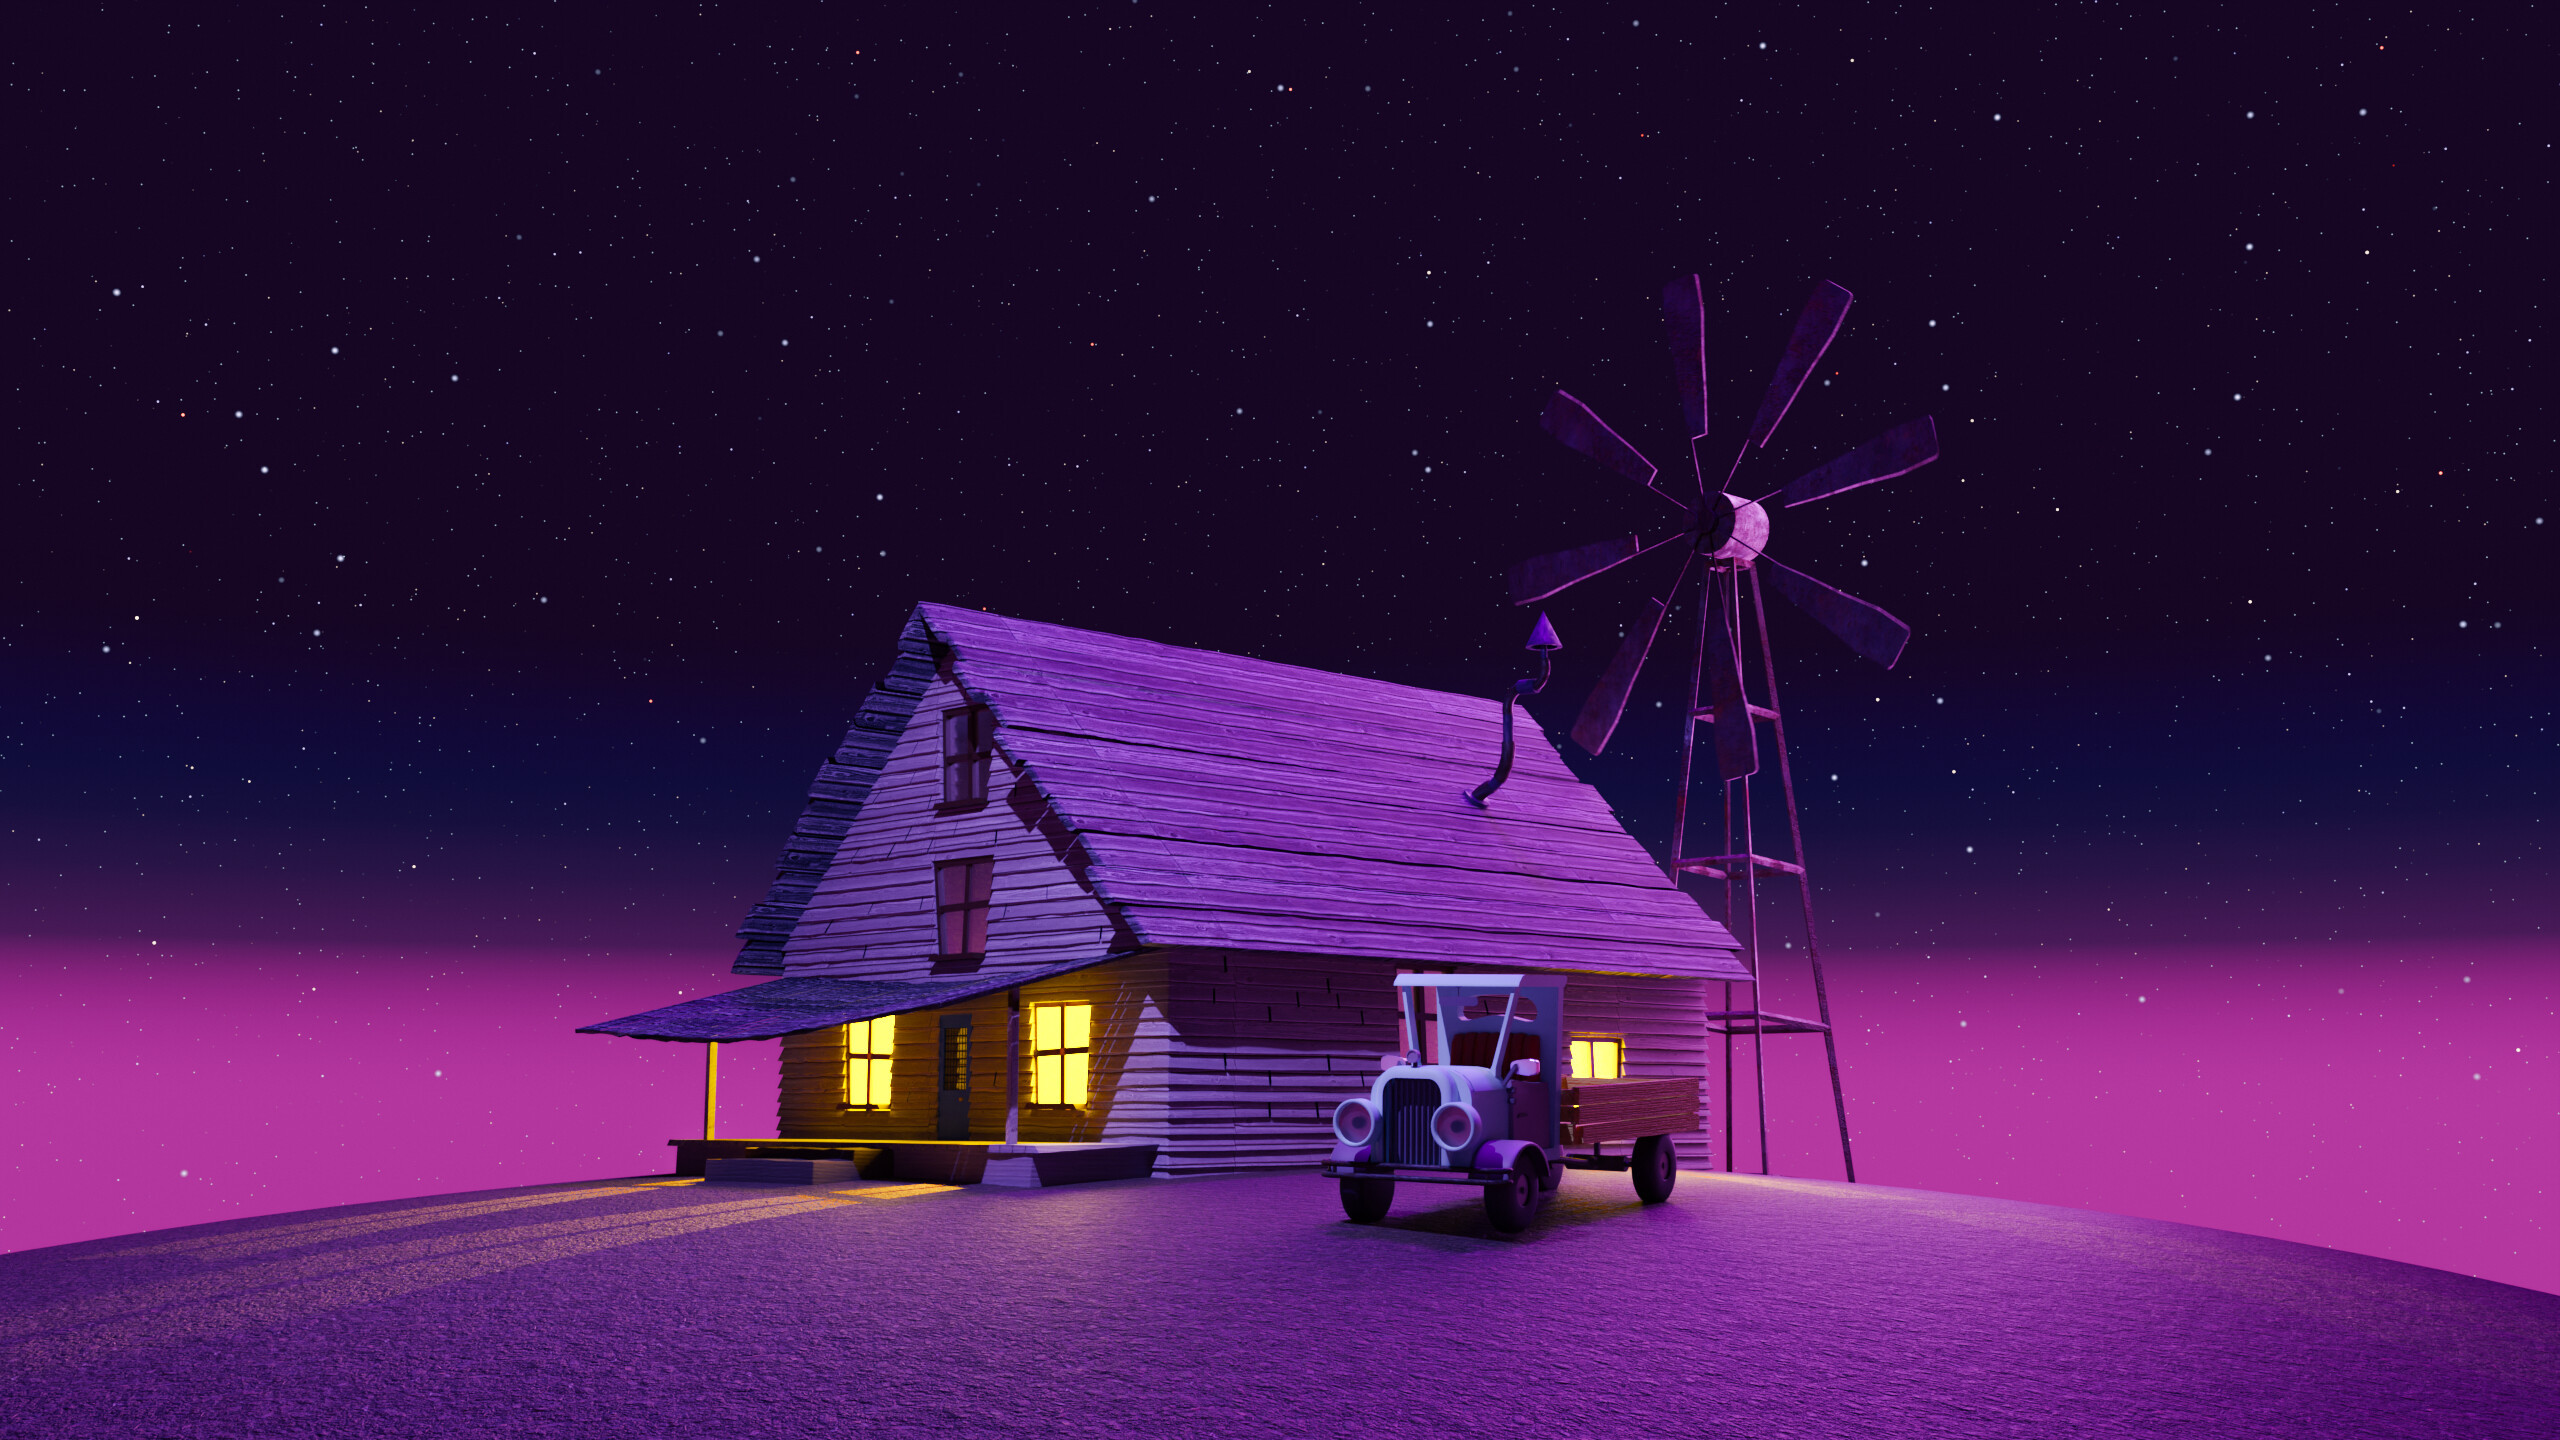 General 2560x1440 house vehicle night windmill gradient cabin cartoon Courage the Cowardly Dog low light digital art